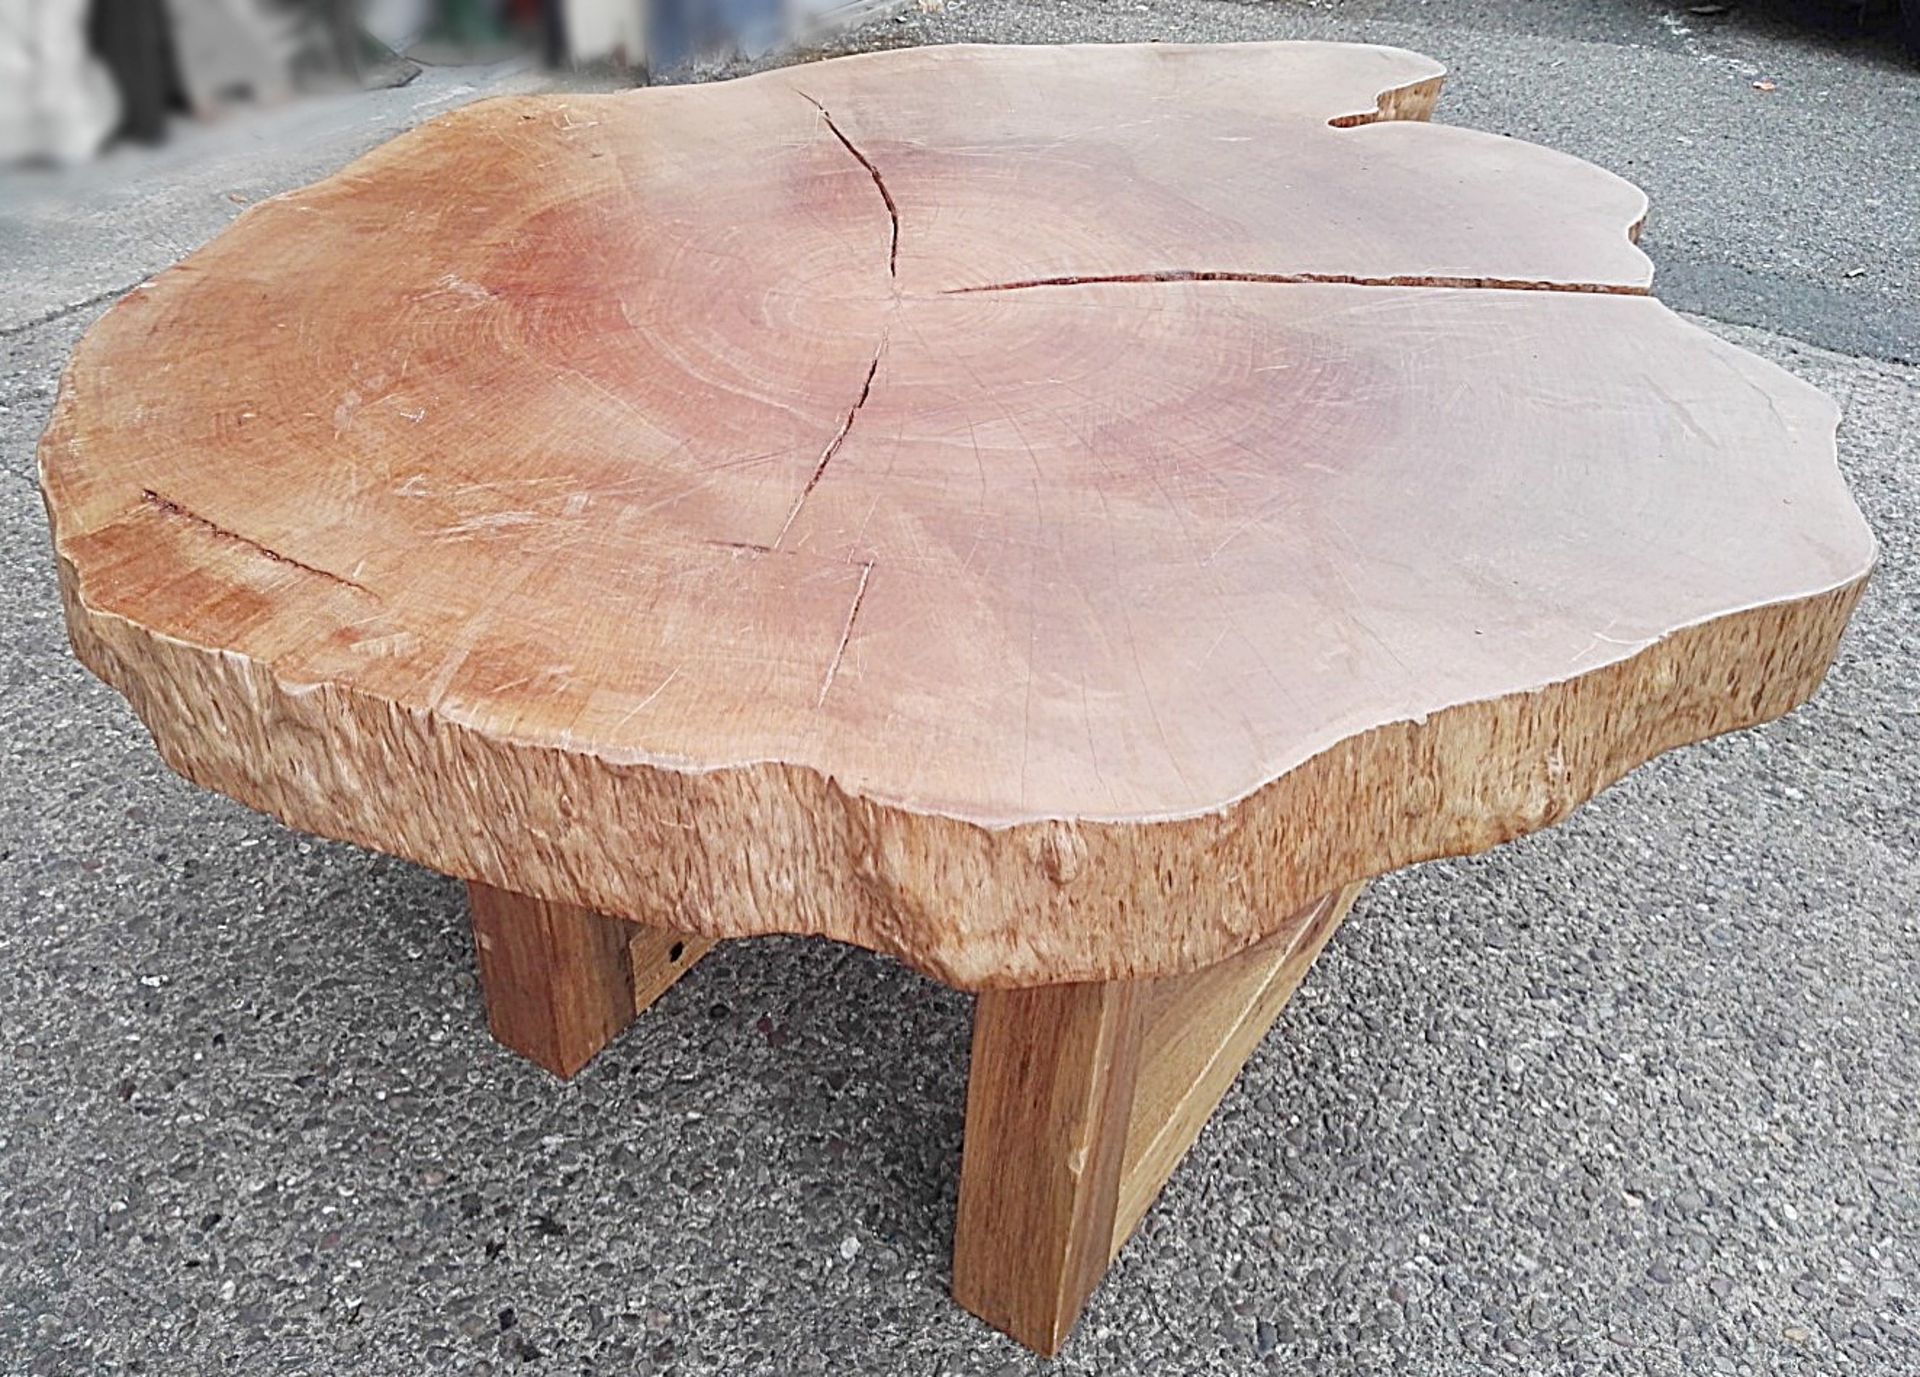 1 x Unique Reclaimed Solid Tree Trunk Coffee Table - Dimensions (approx): W152 x D129 x H63.3cm